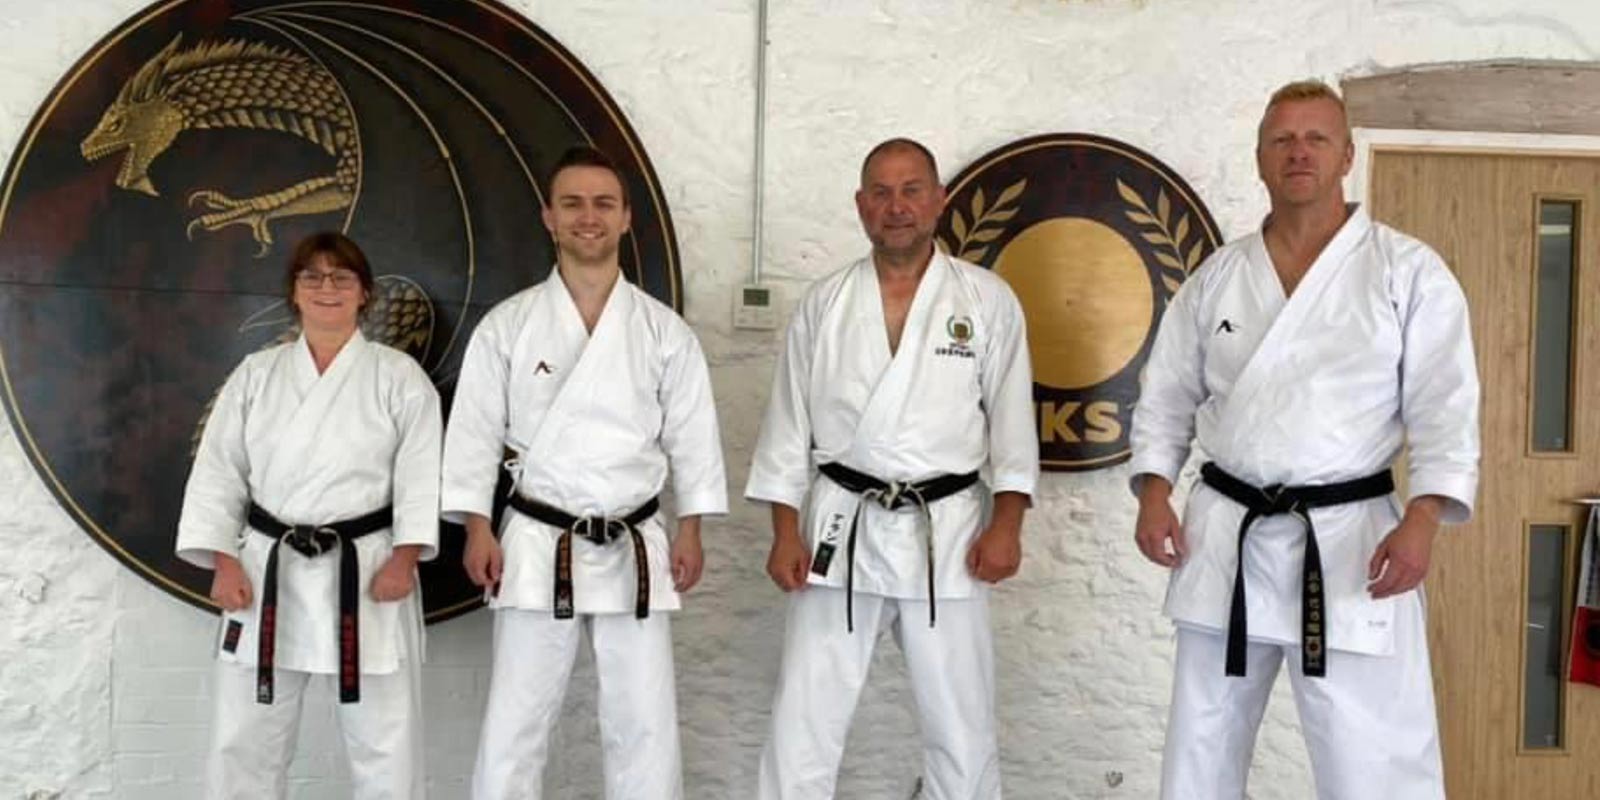 Ian Connell Sensei with Alan Campbell Sensei (7th Dan) along with his wife and son who also train at Bristol Karate Academy